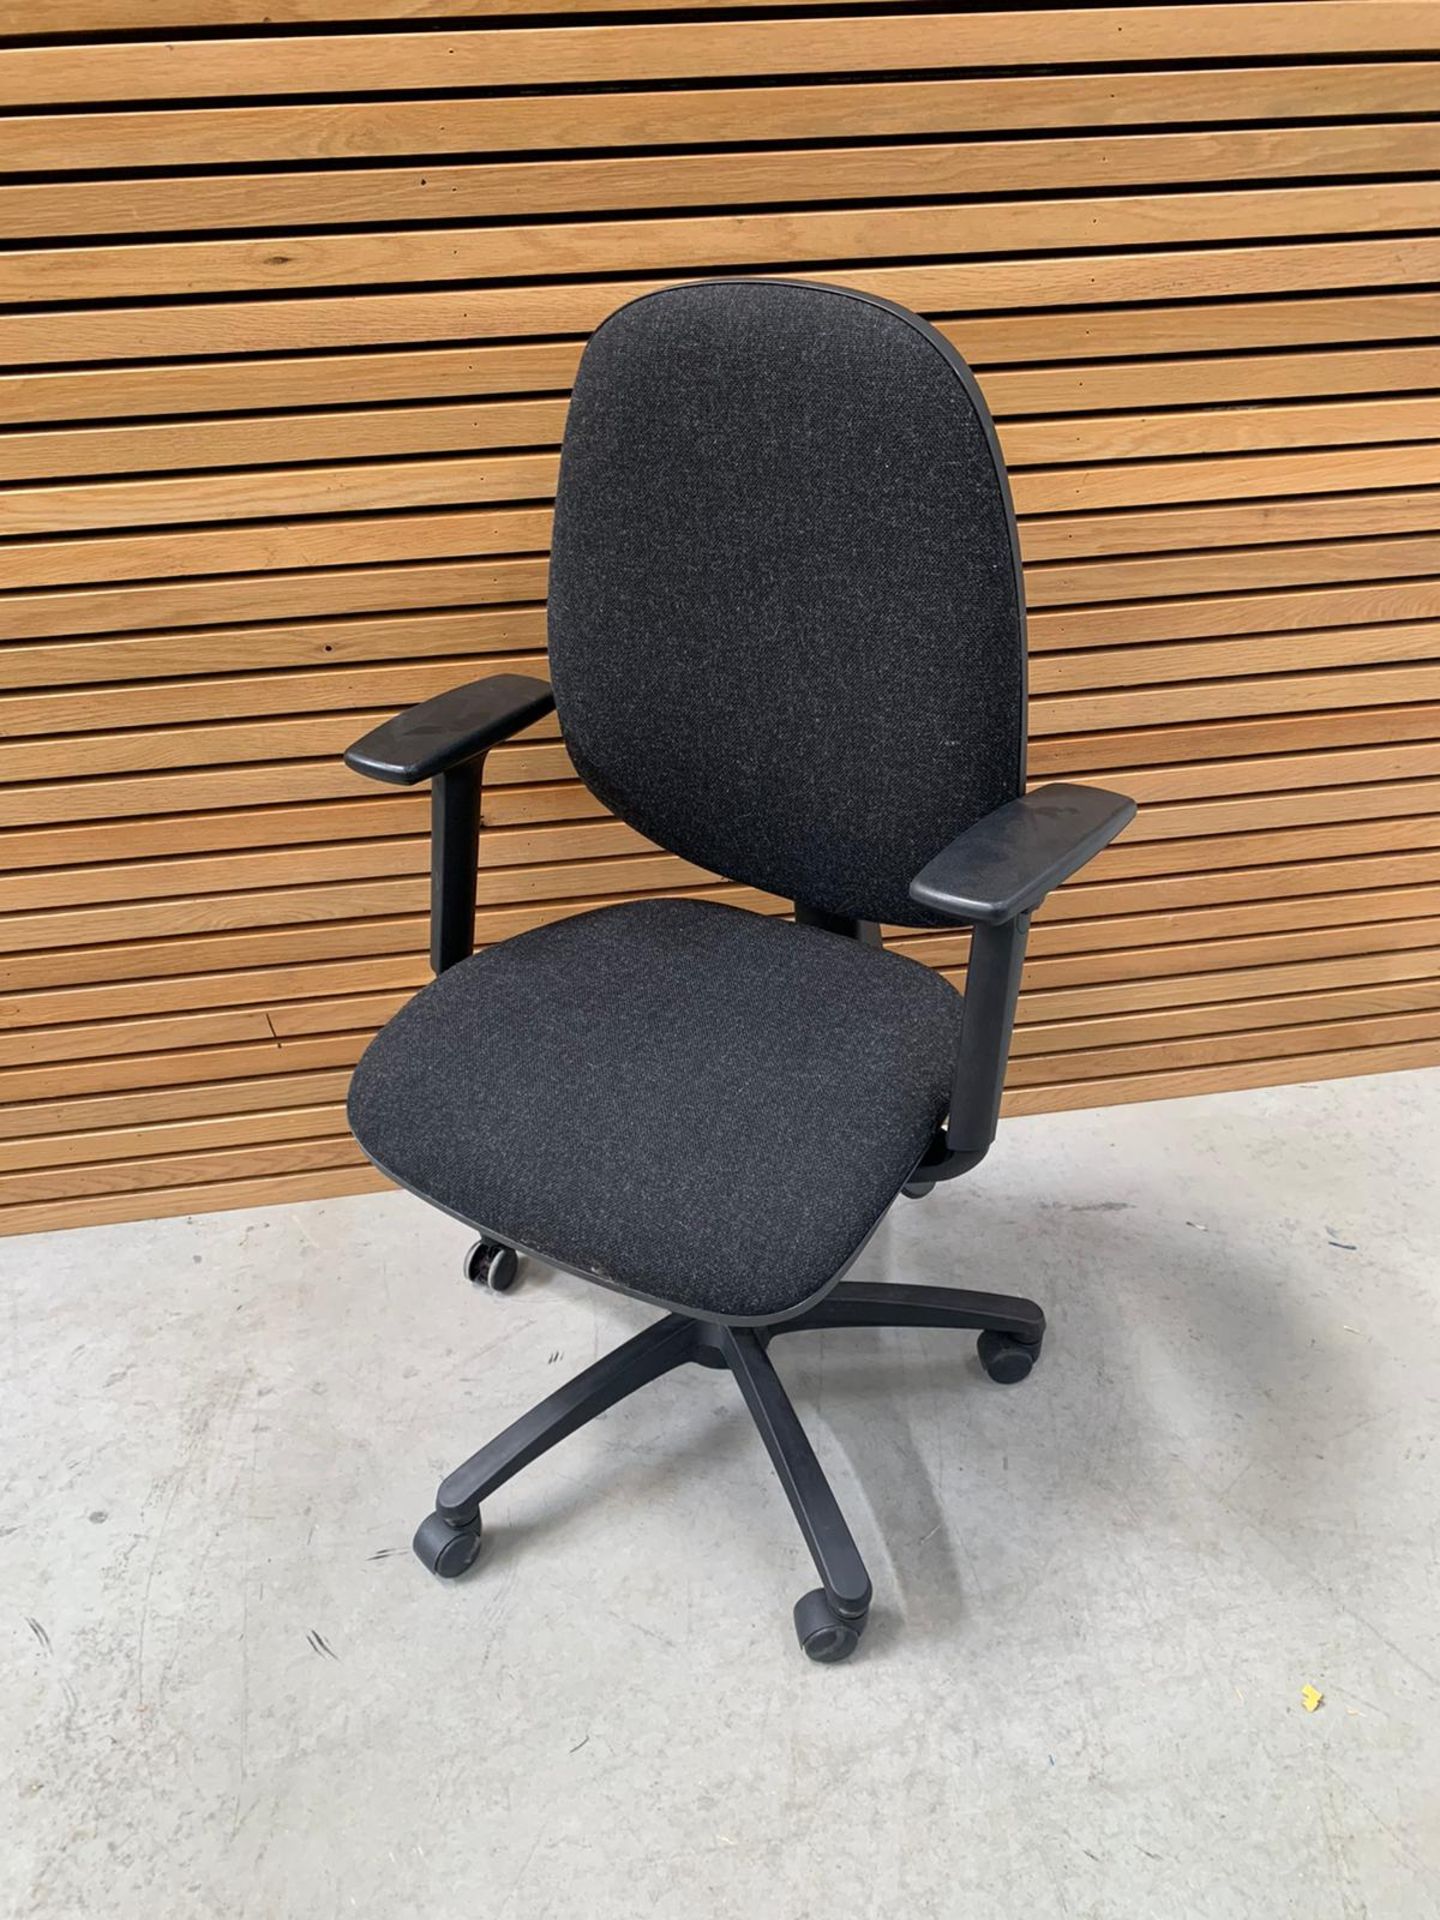 Black Commercial Grade Office Chair - Image 4 of 8